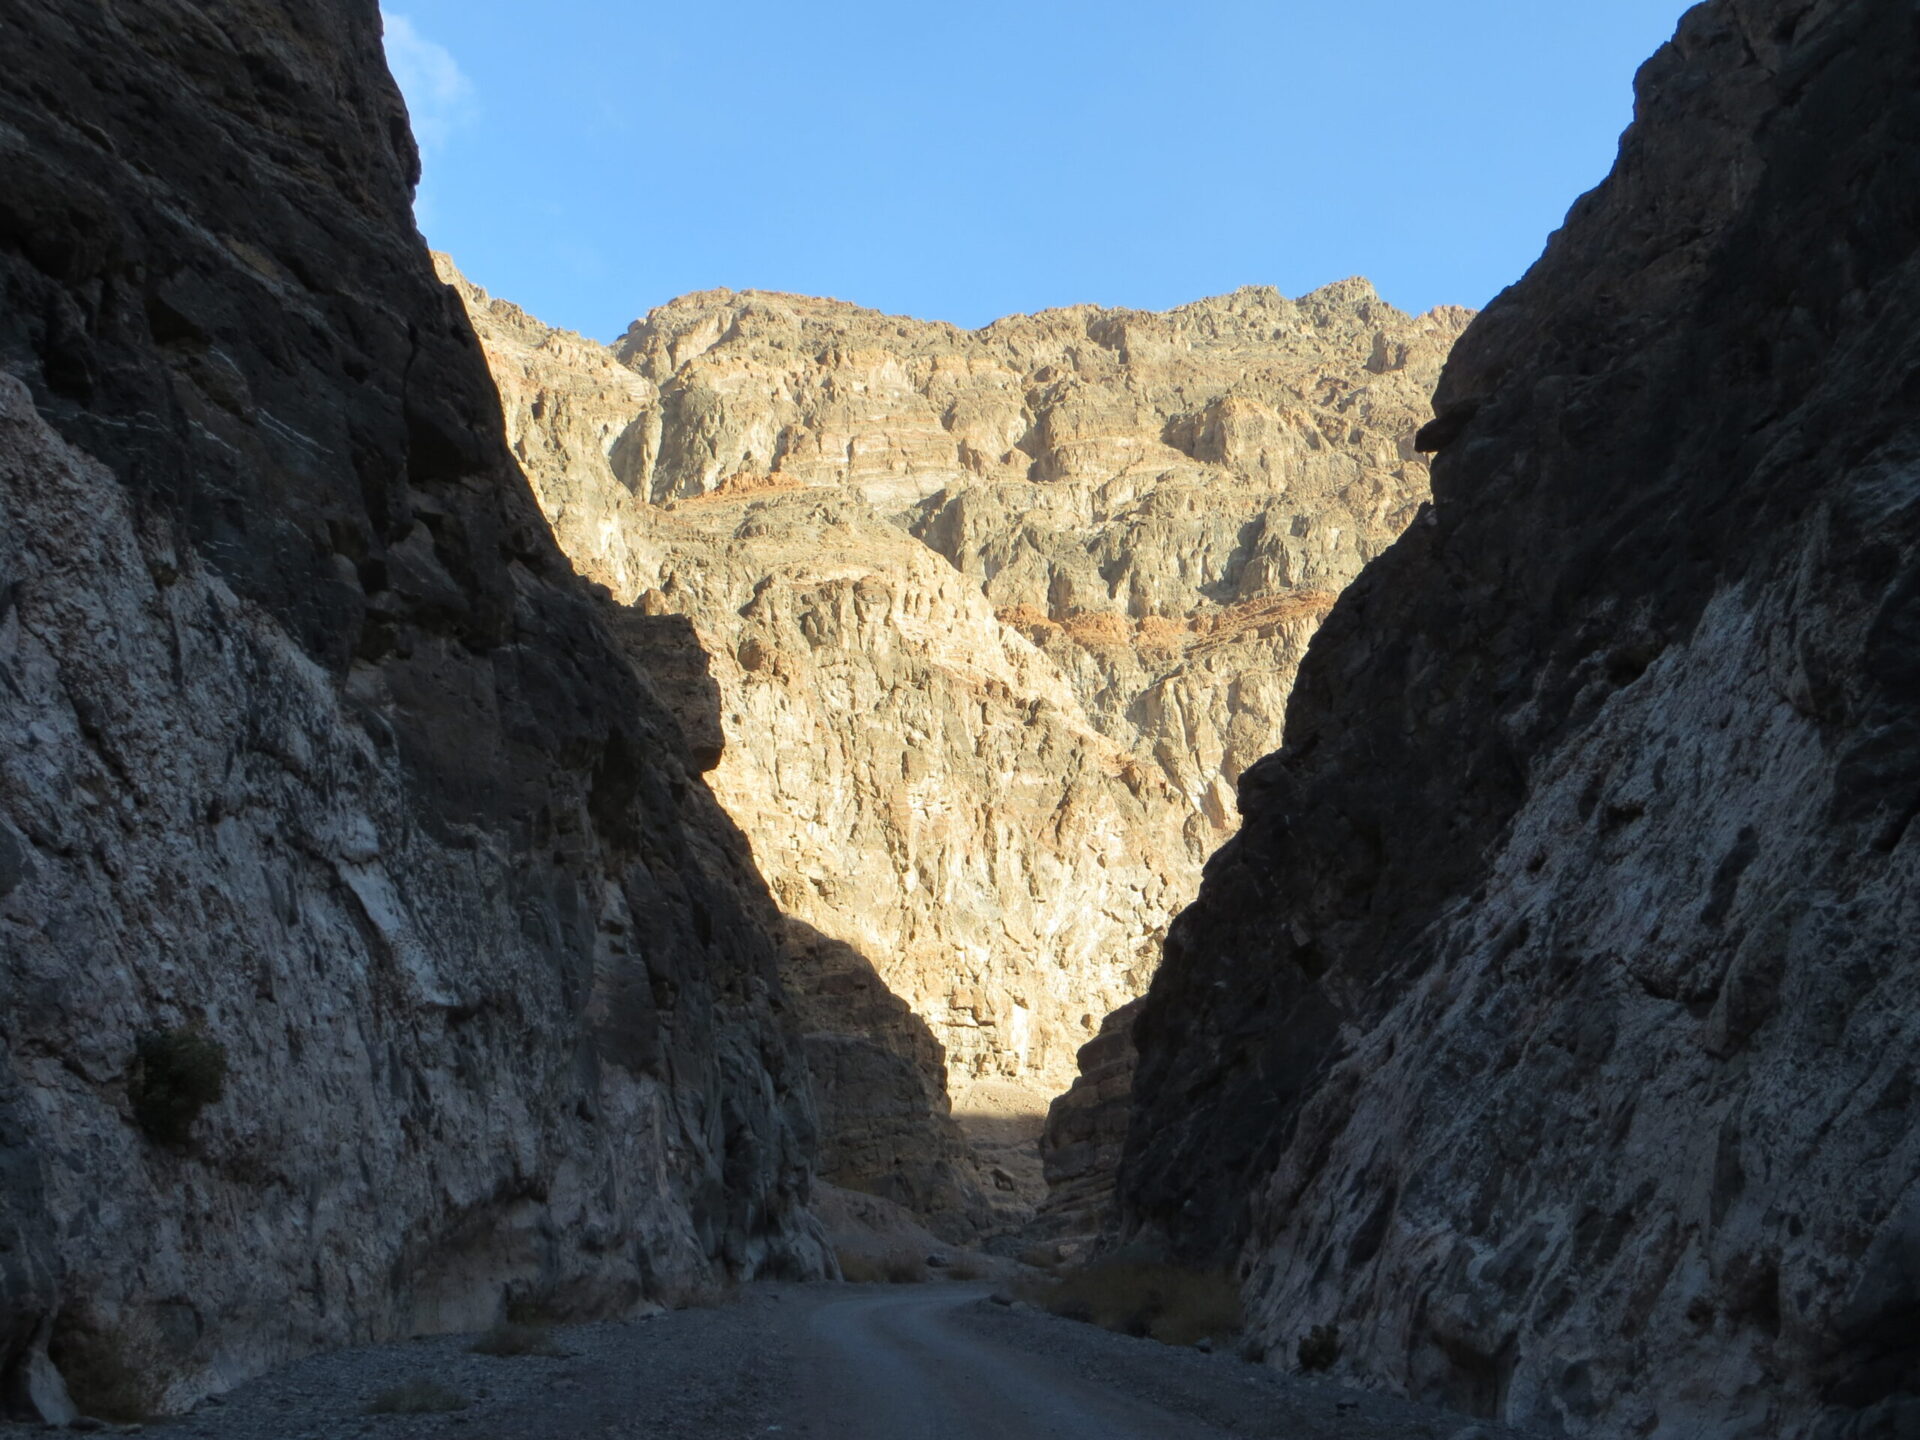 My dad took a picture as he hiked through the opening of Titus Canyon on the race course. Amazing!